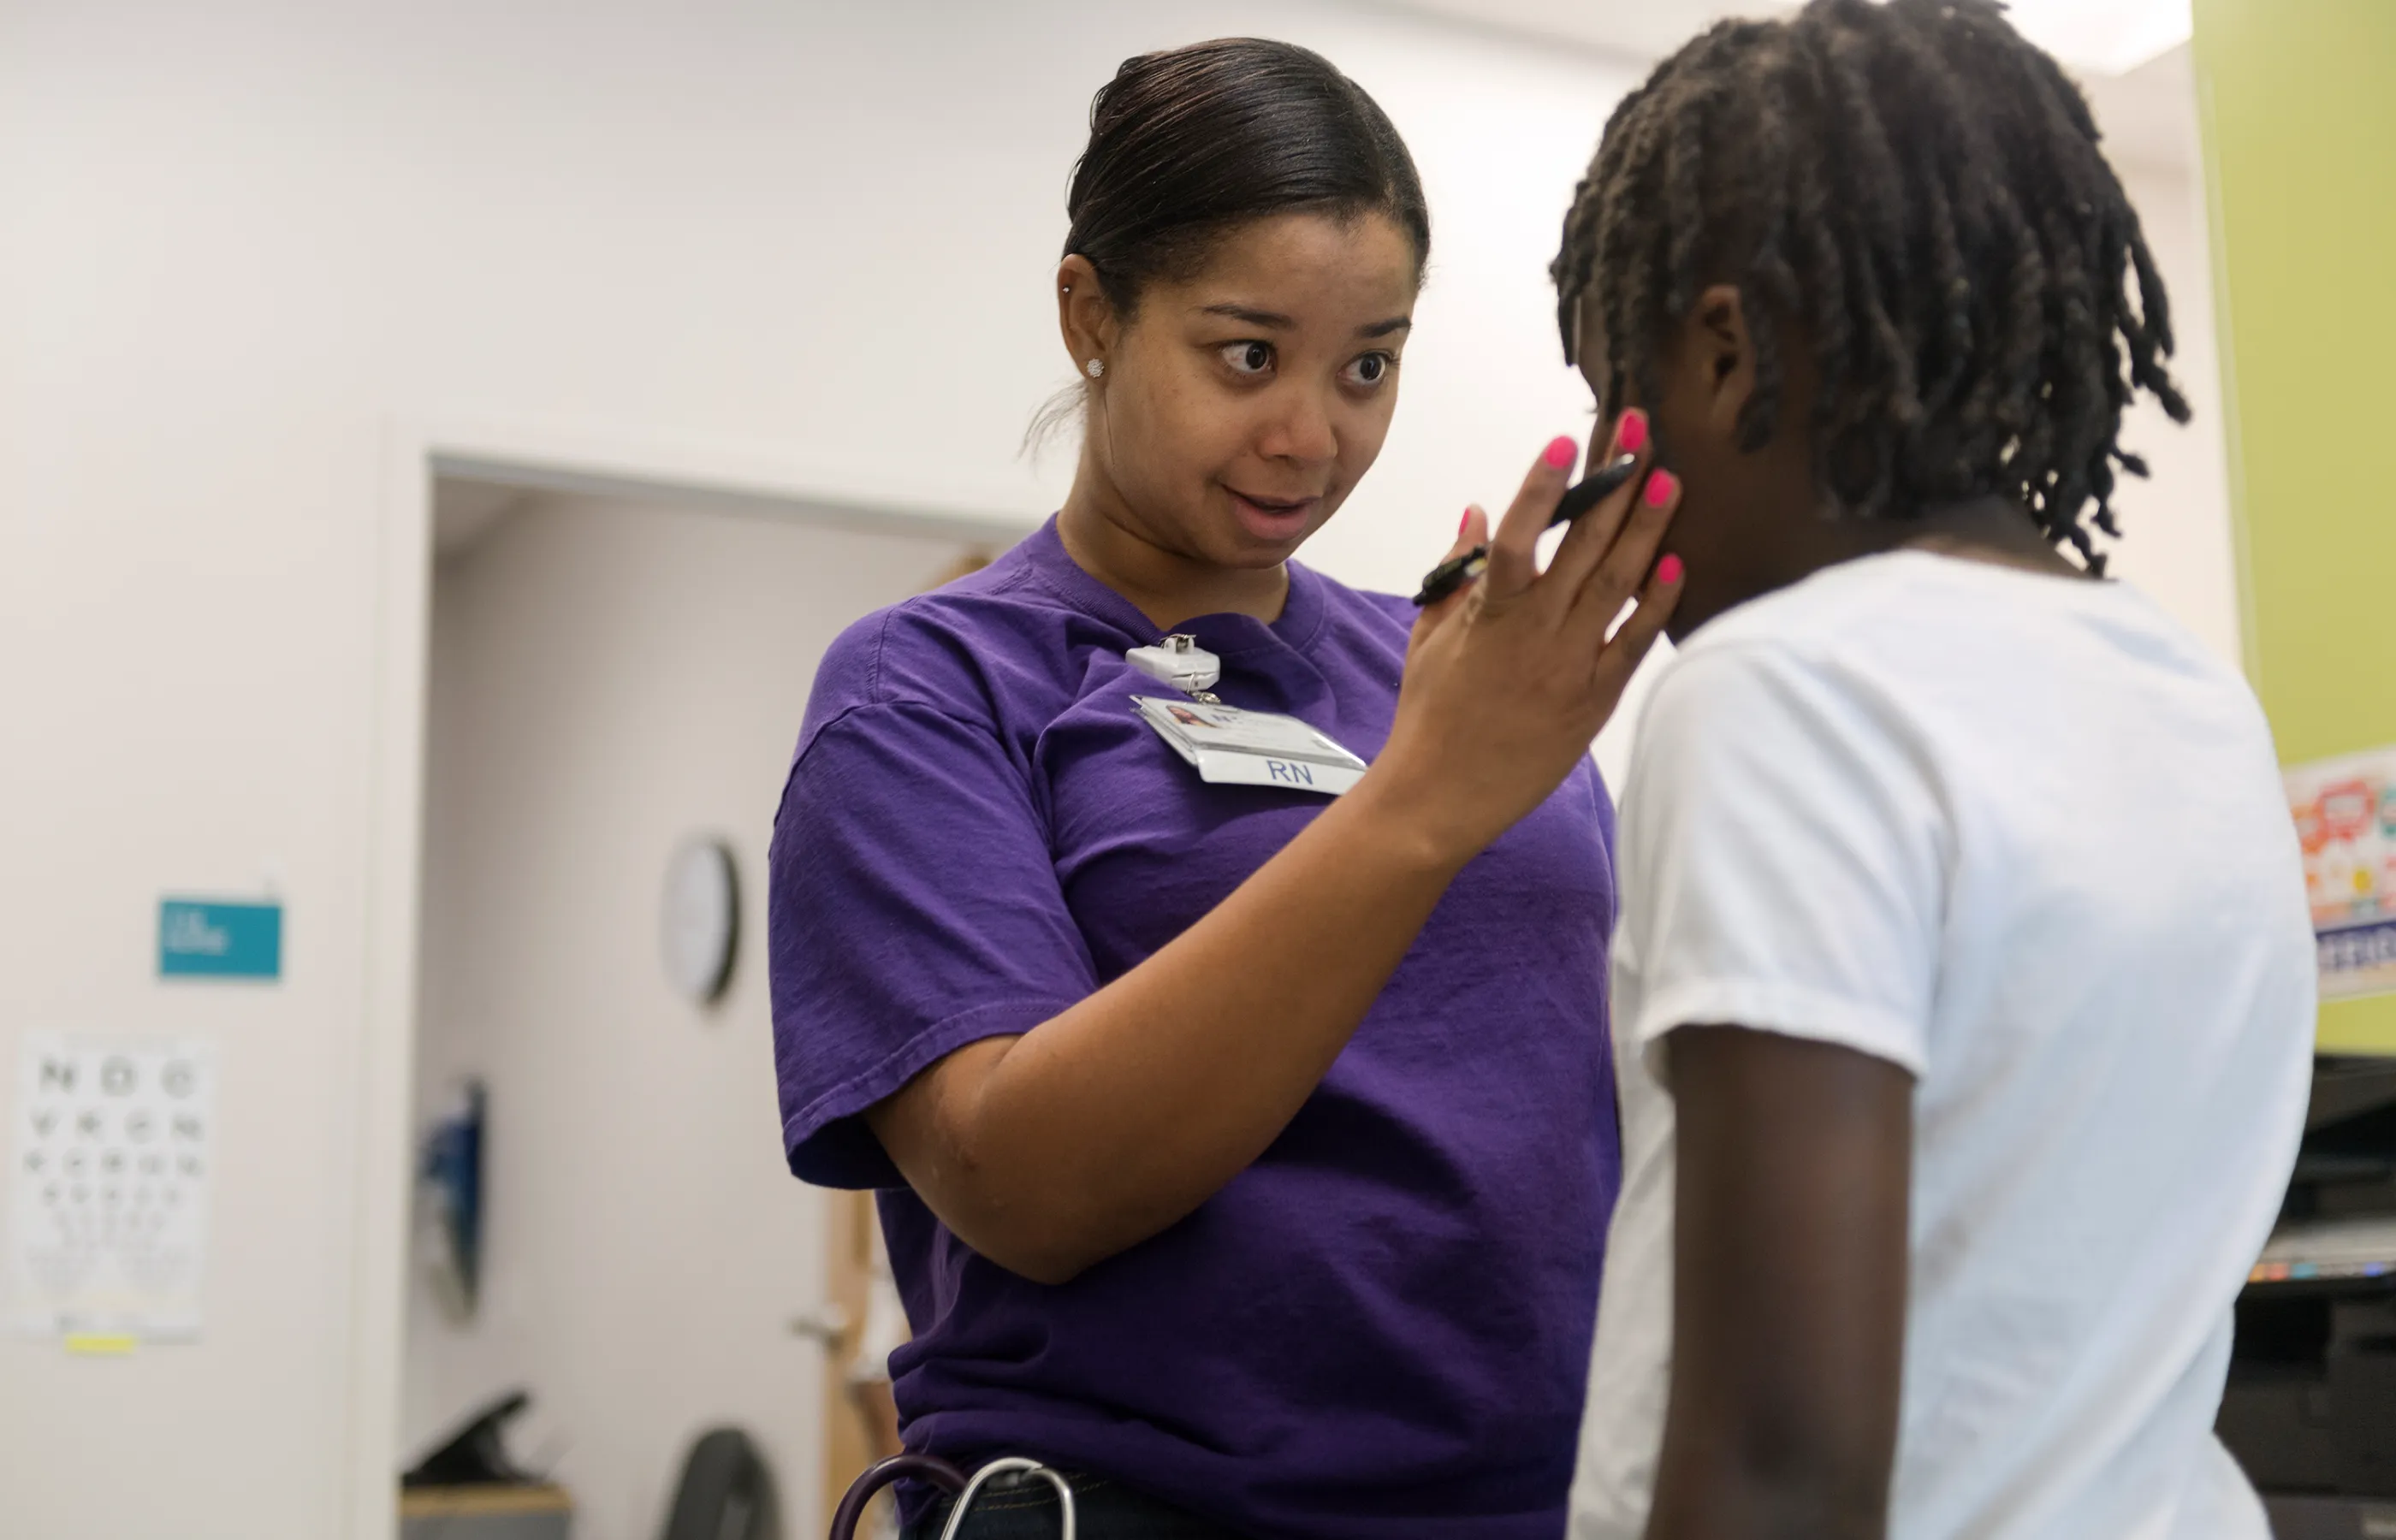 A Novant Health Registered Nurse (RN) is talking with a young child. The RN has a hand placed on the childs face as she talks and looks them in the eye. 